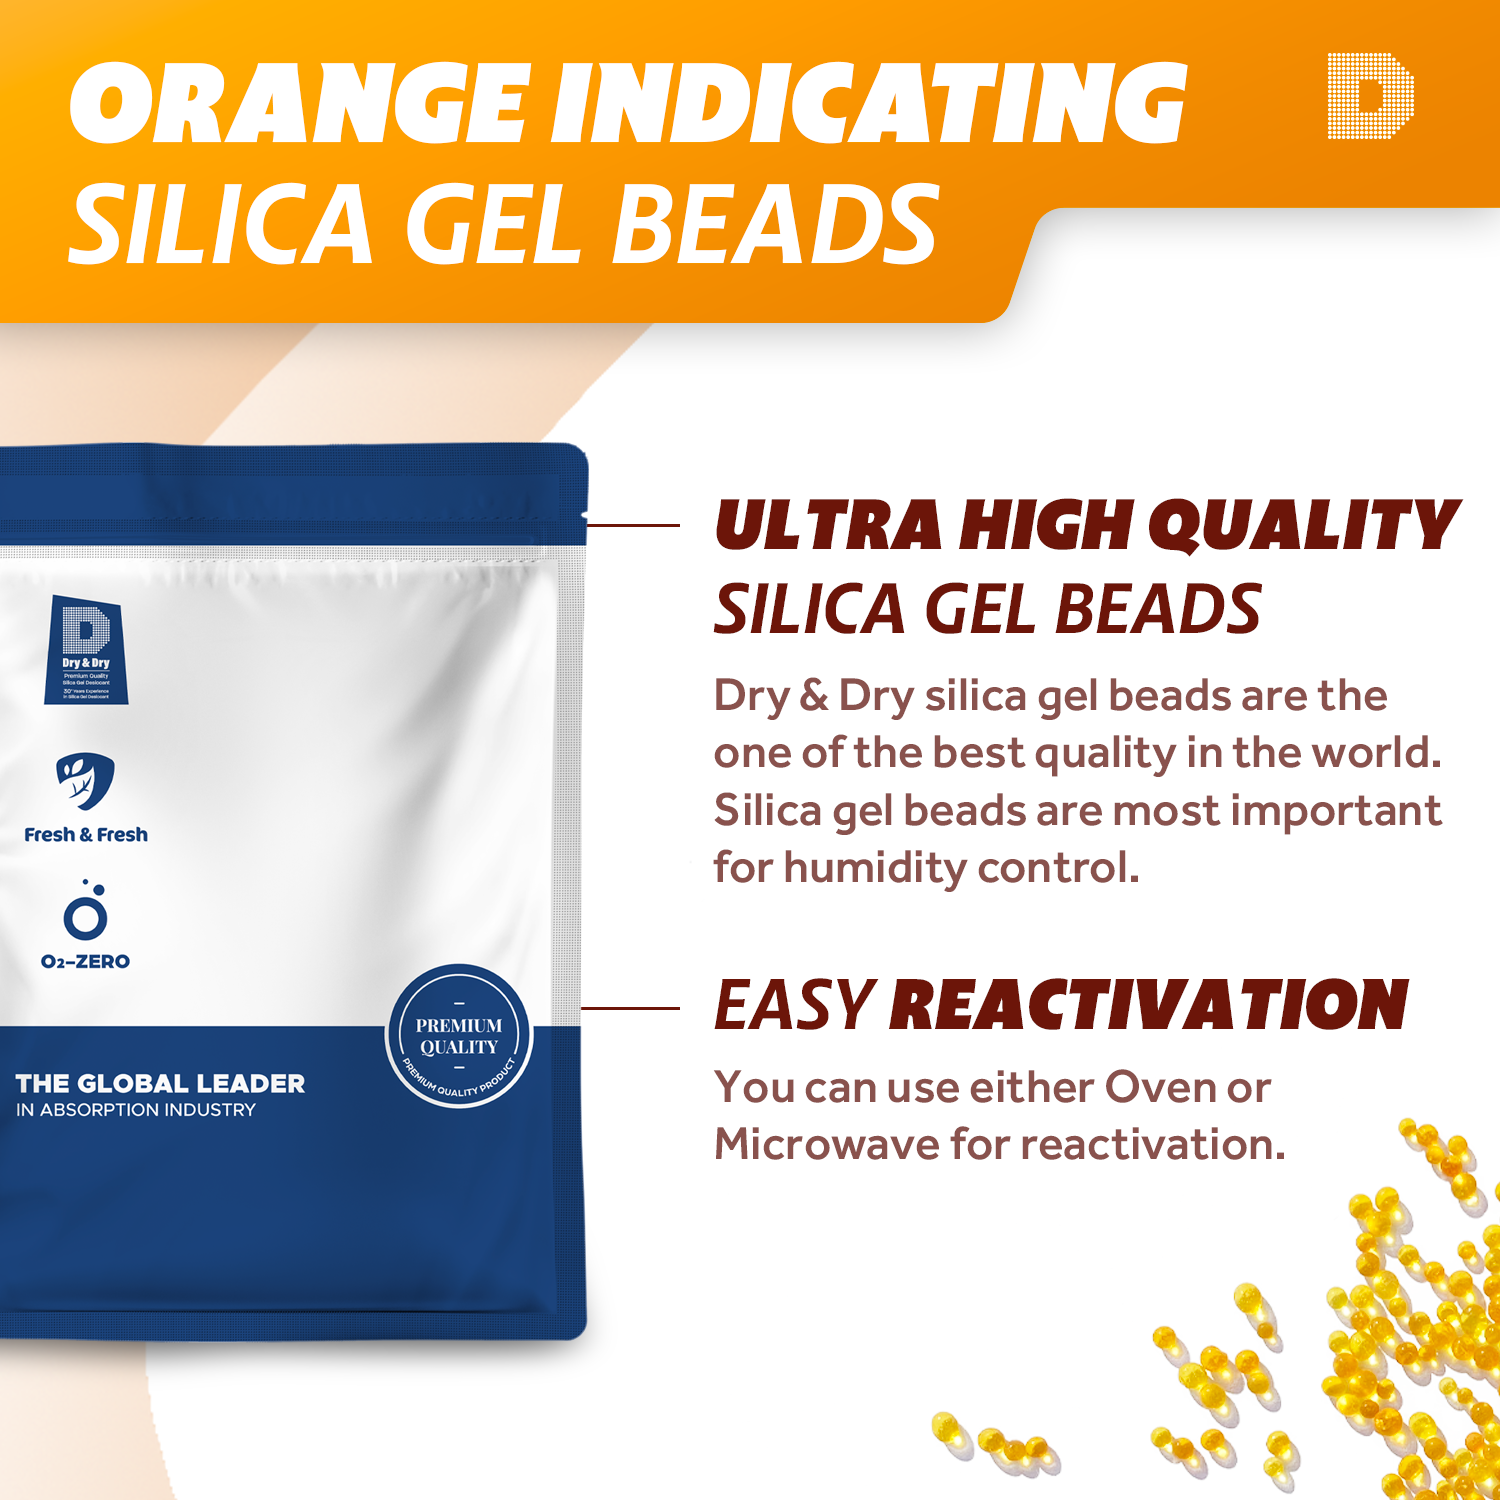 Difference Between Orange and Blue Indicating Silica Gel